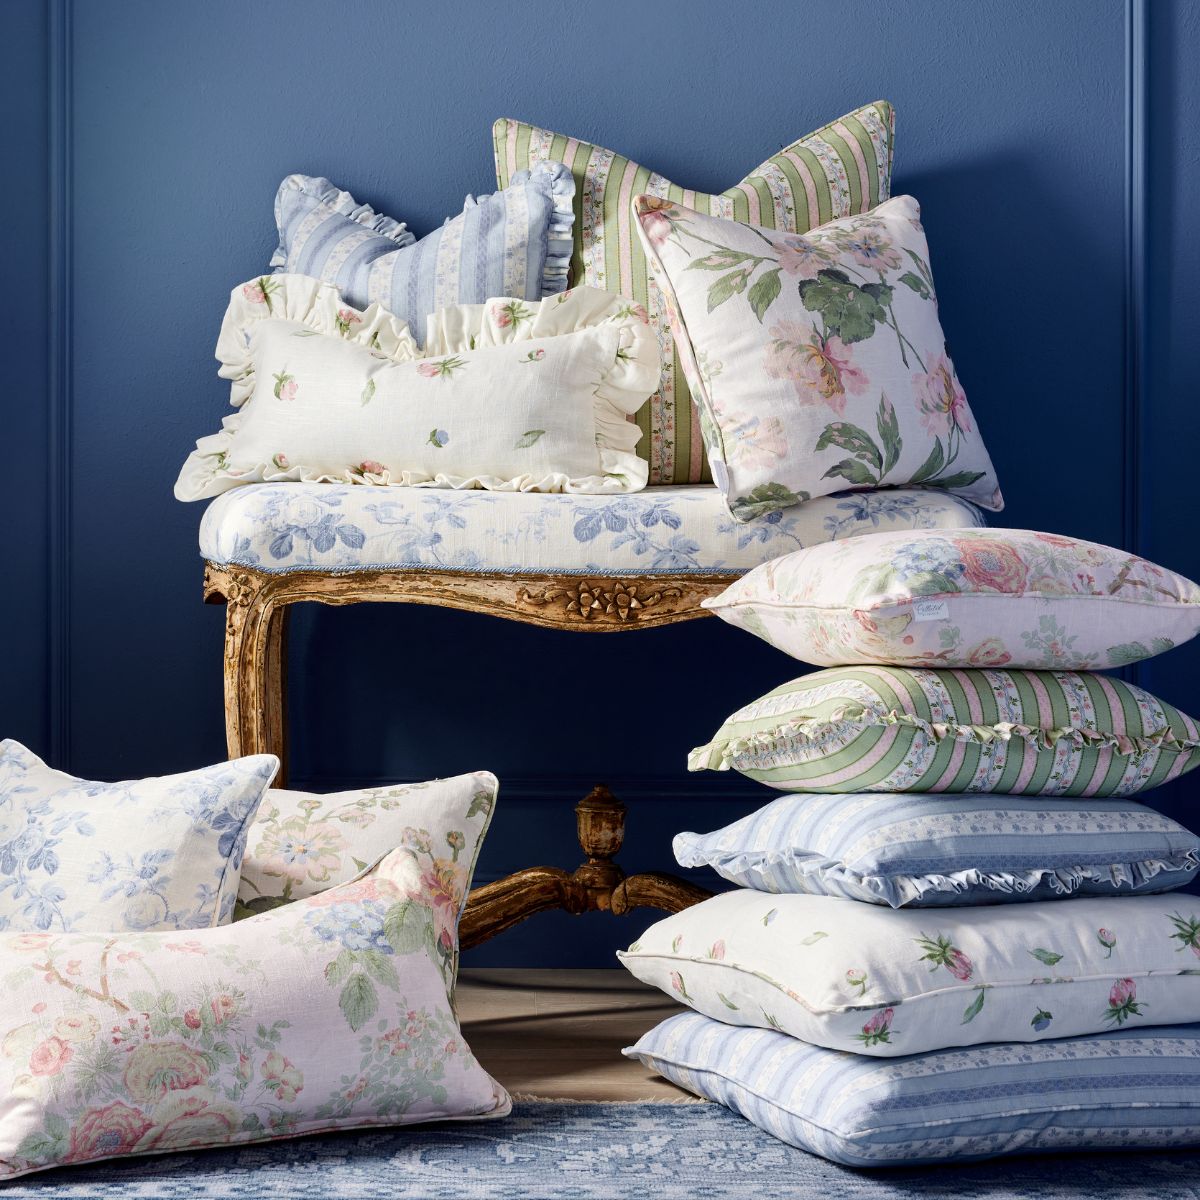 Isabelle in Blue Frill Pillow - Caitlin Wilson Design